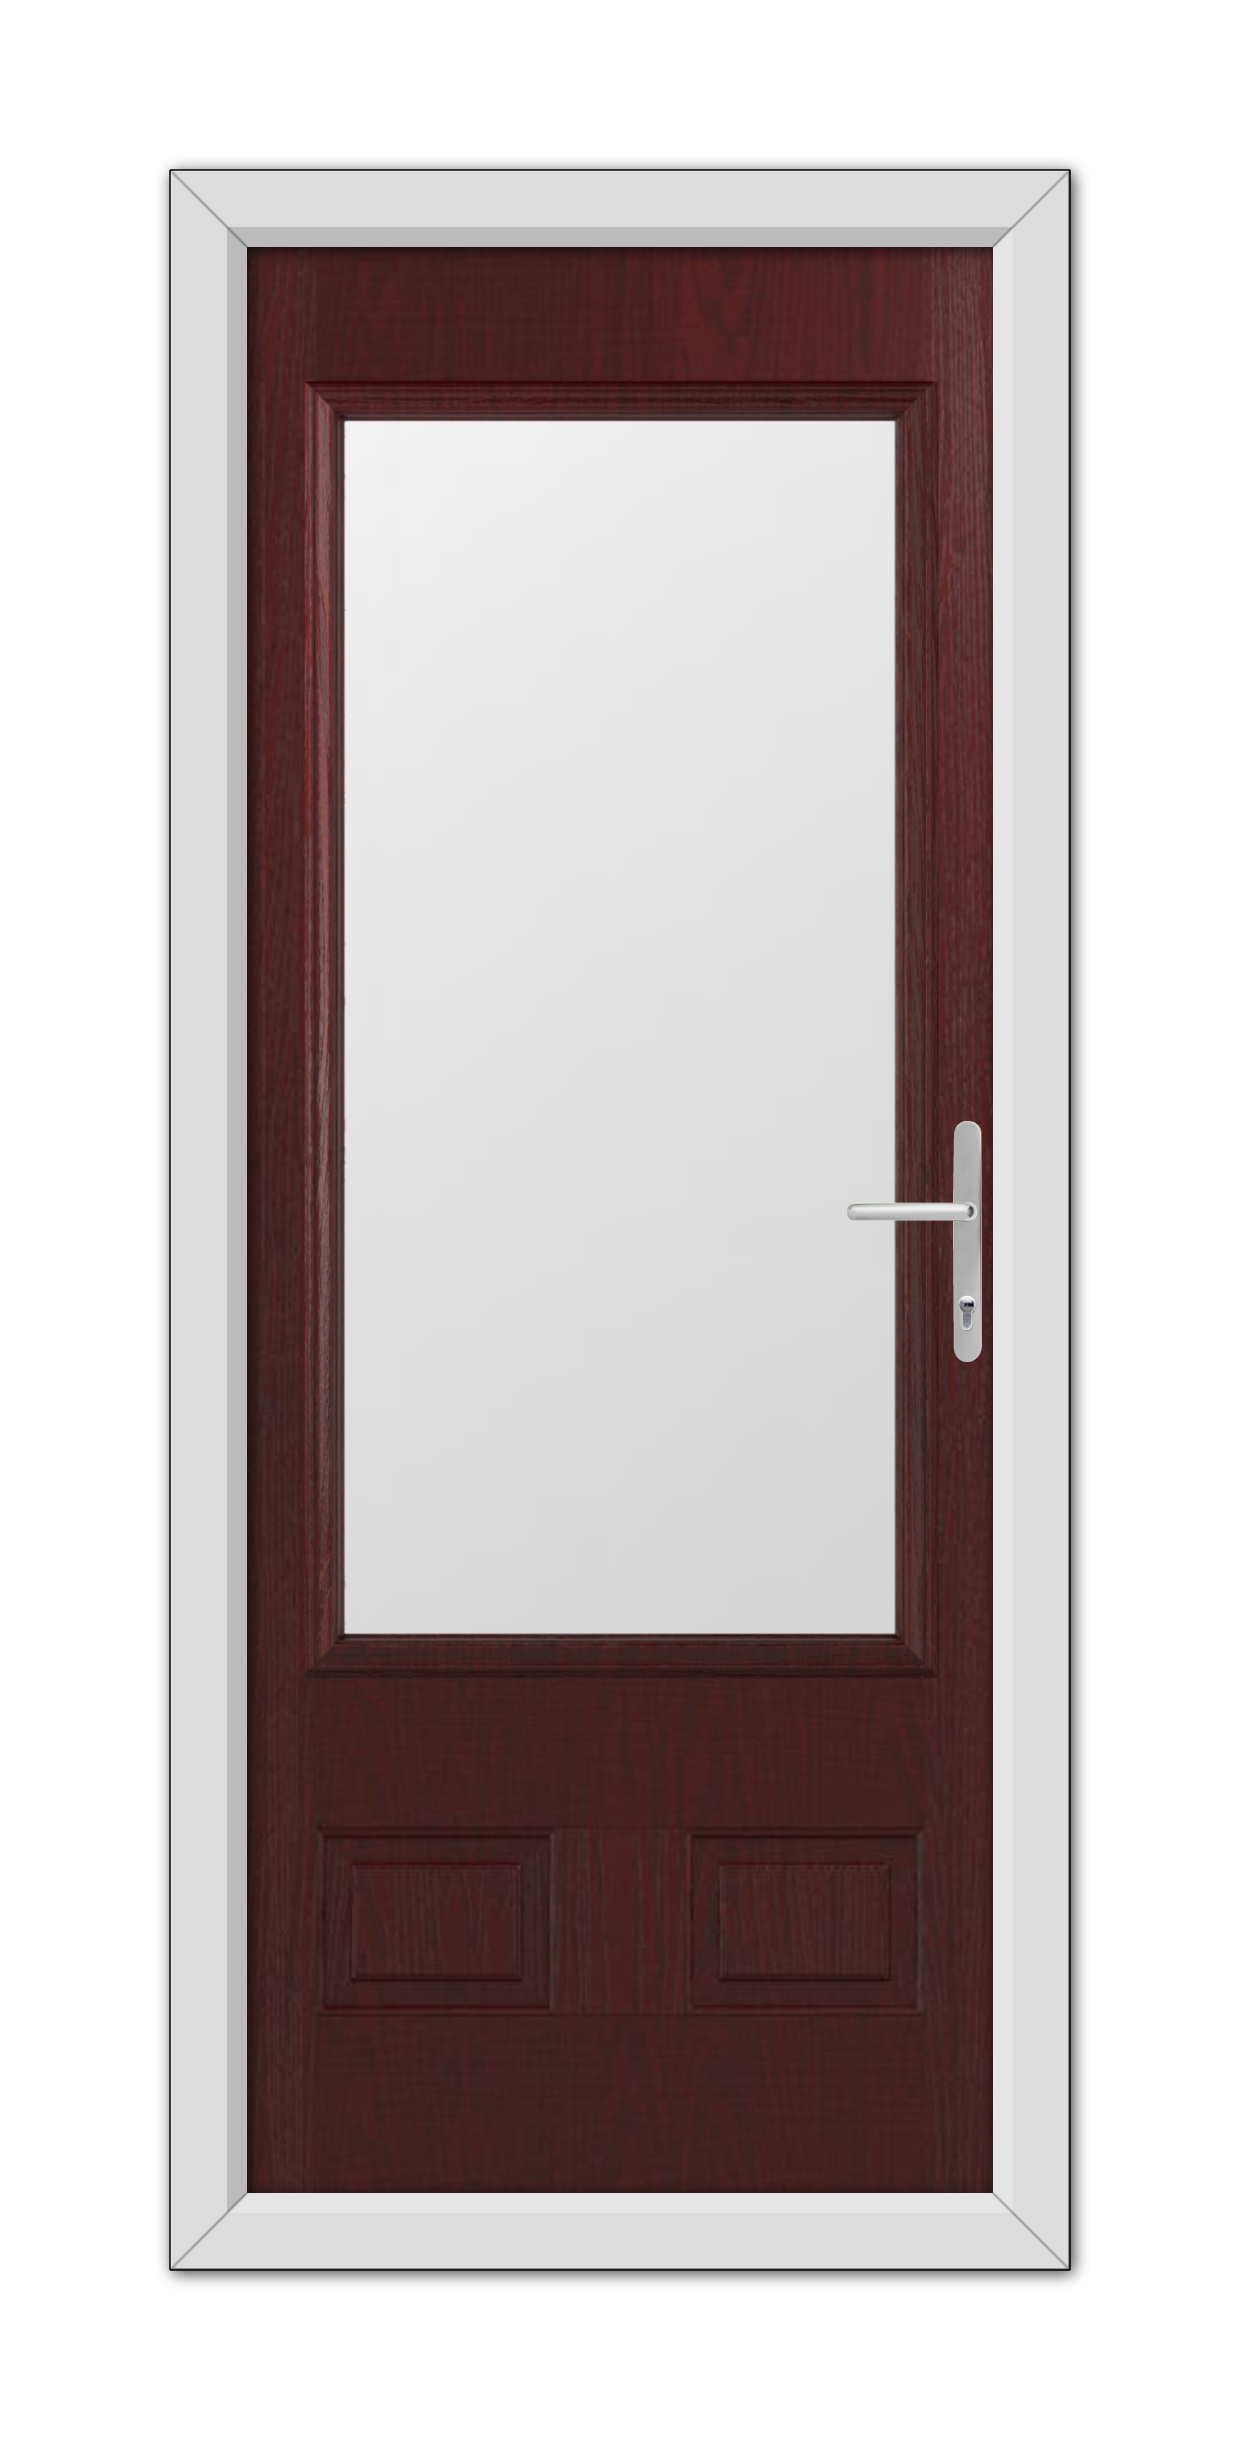 A closed Rosewood Walcot Composite Door 48mm Timber Core in a white frame, featuring a vertical handle on the right, set against a plain background.